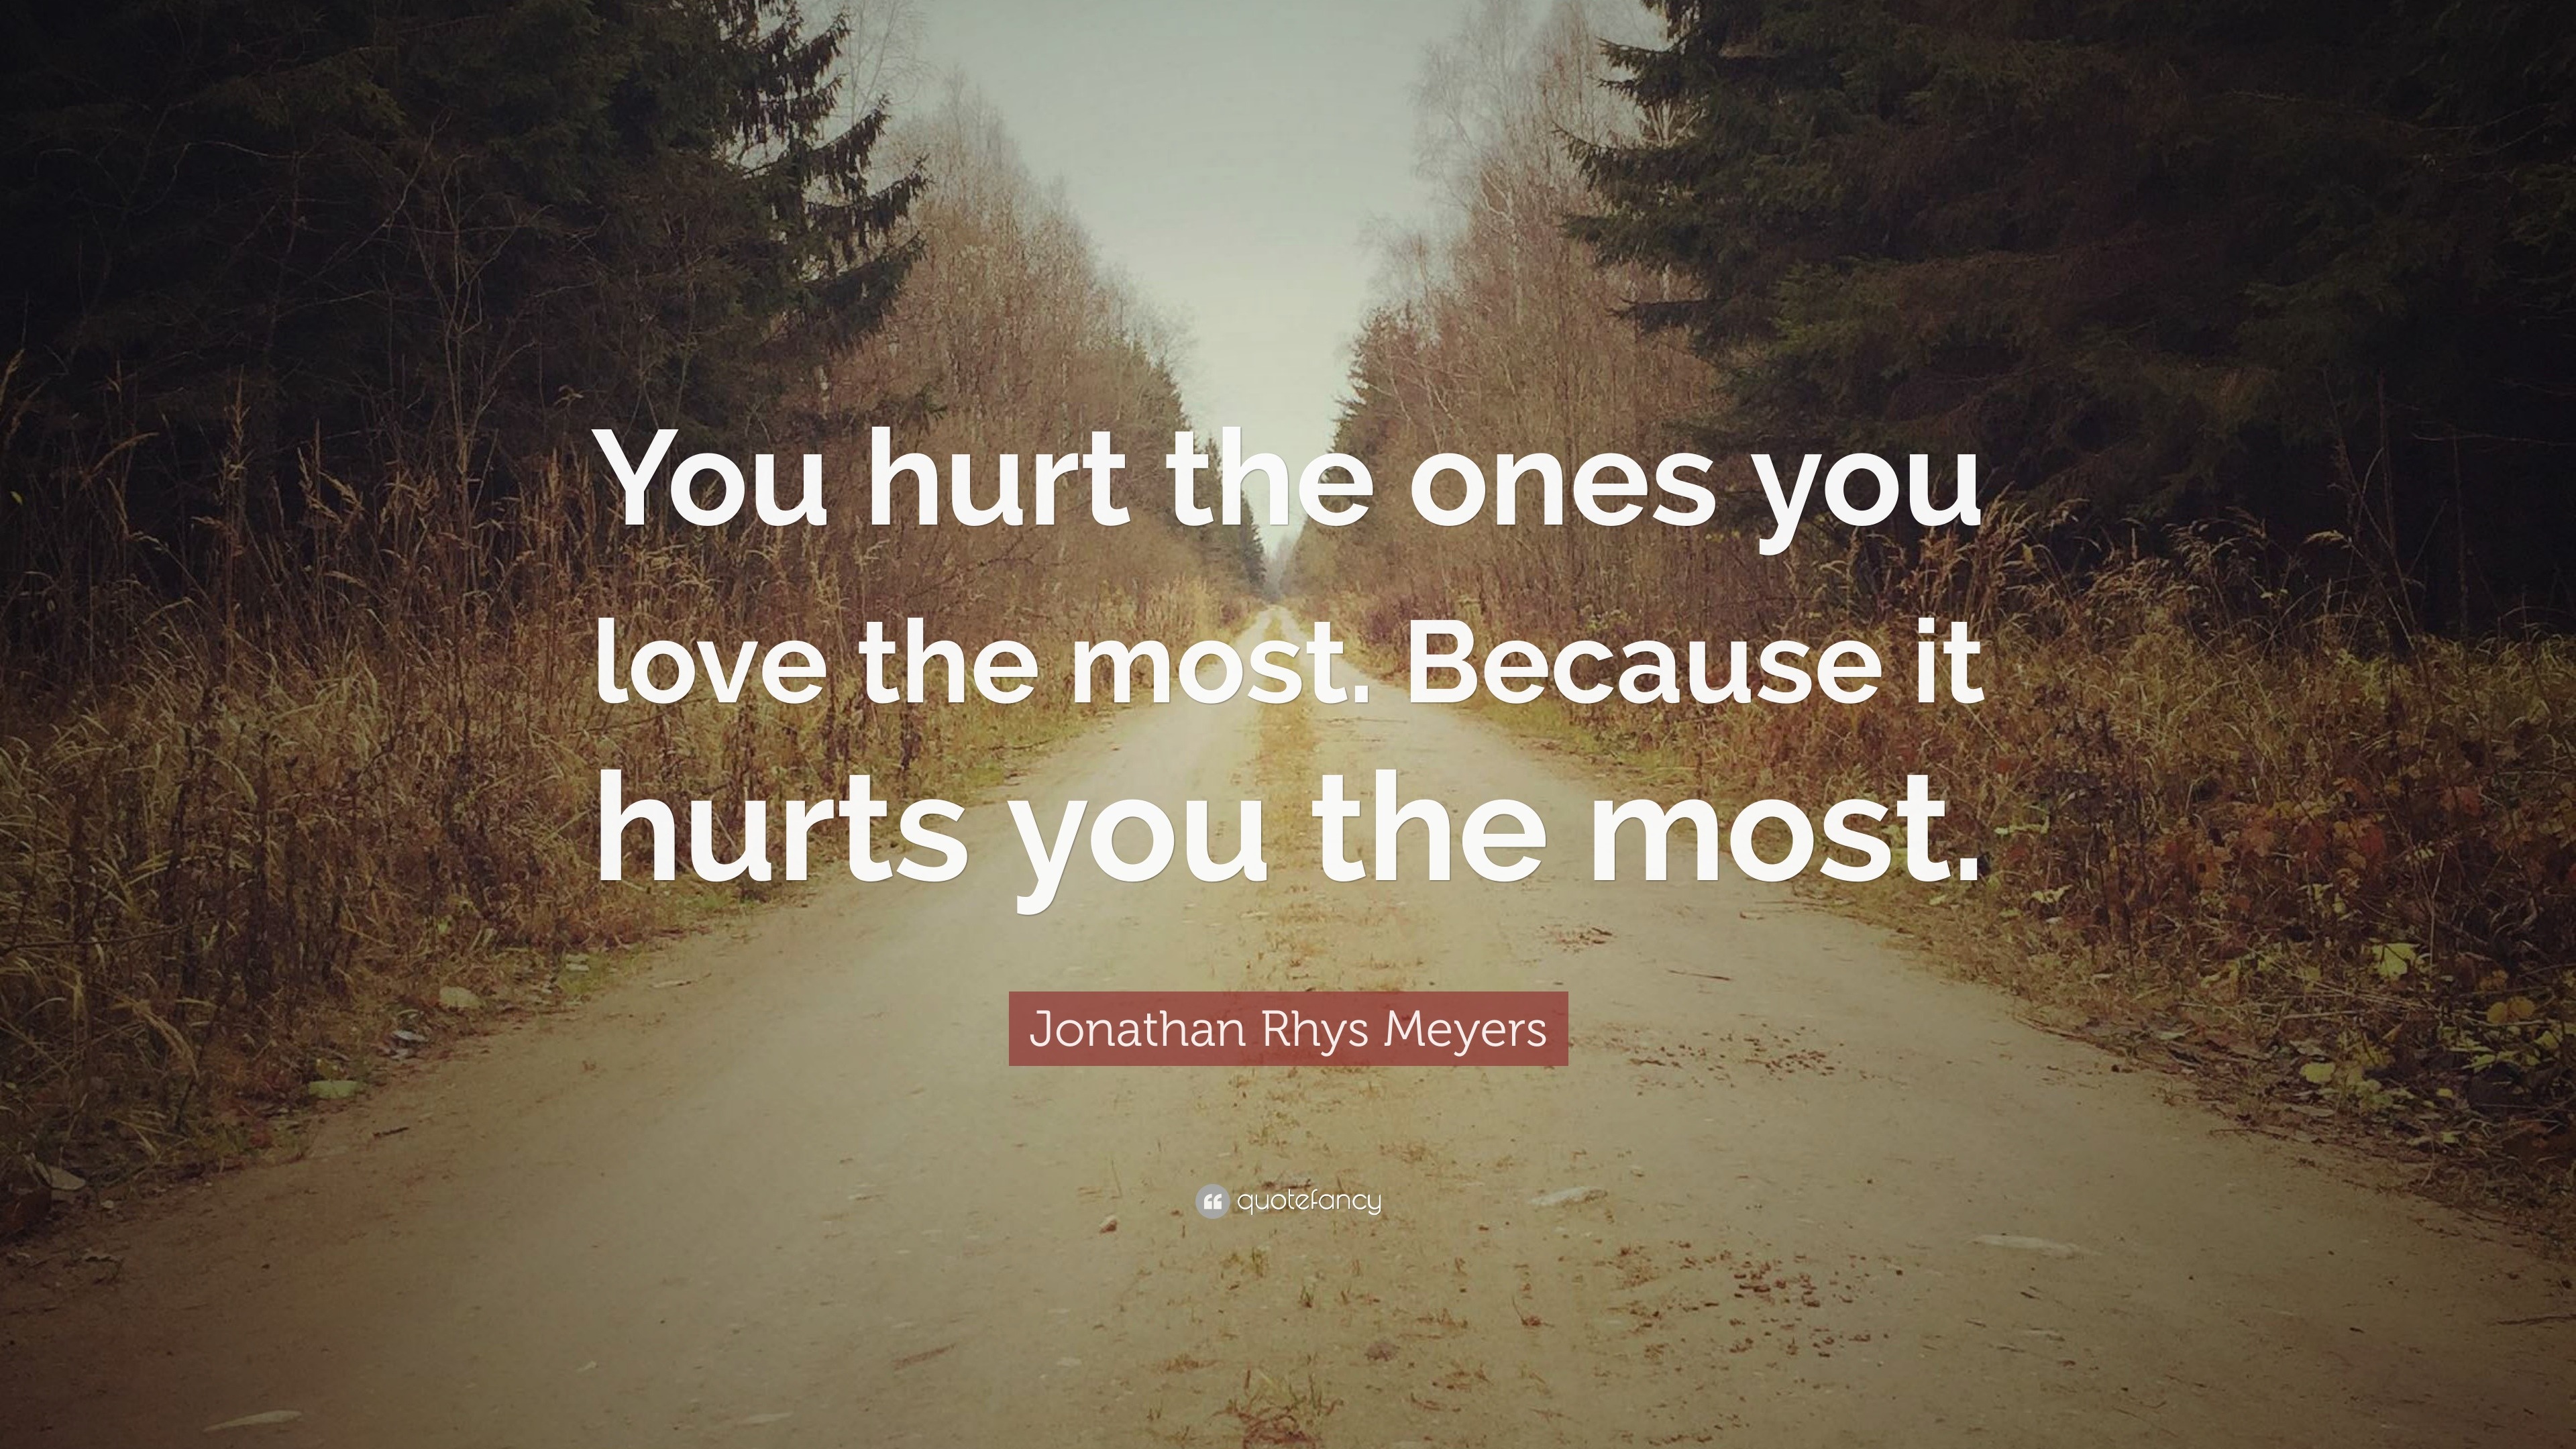 Jonathan Rhys Meyers Quote “You hurt the ones you love the most Because